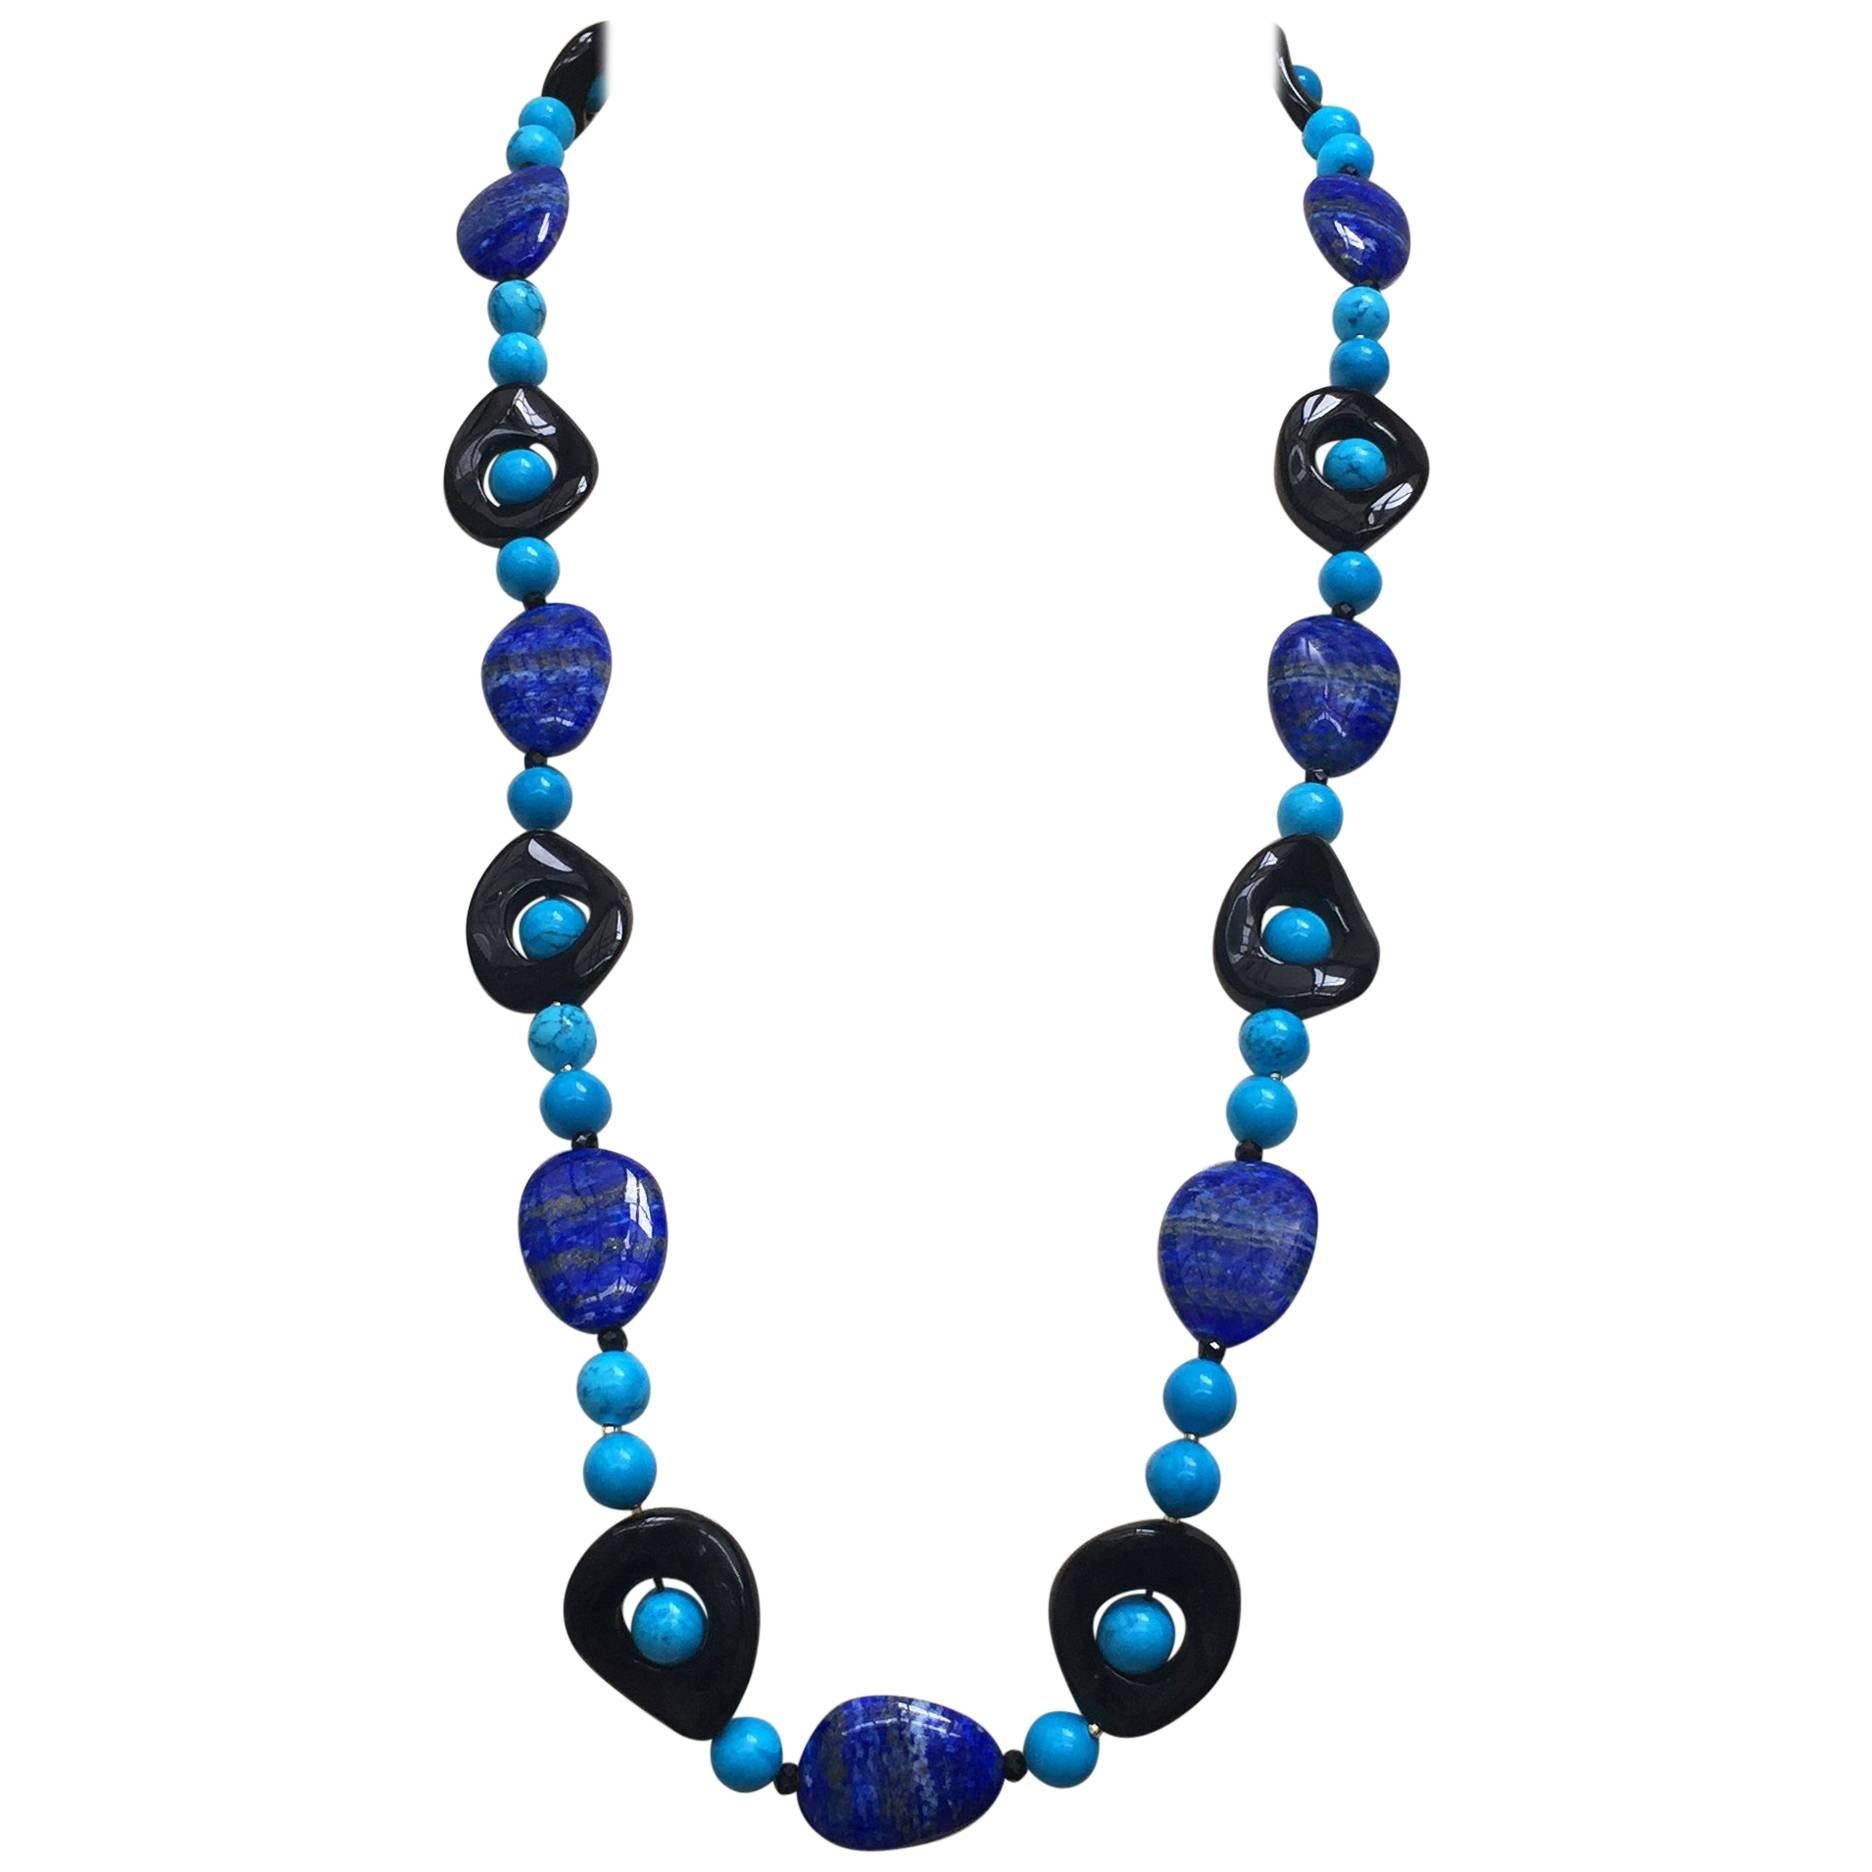 Turquoise, Lapis Lazuli and Onyx Necklace with 14 Karat Yellow Gold Clasp